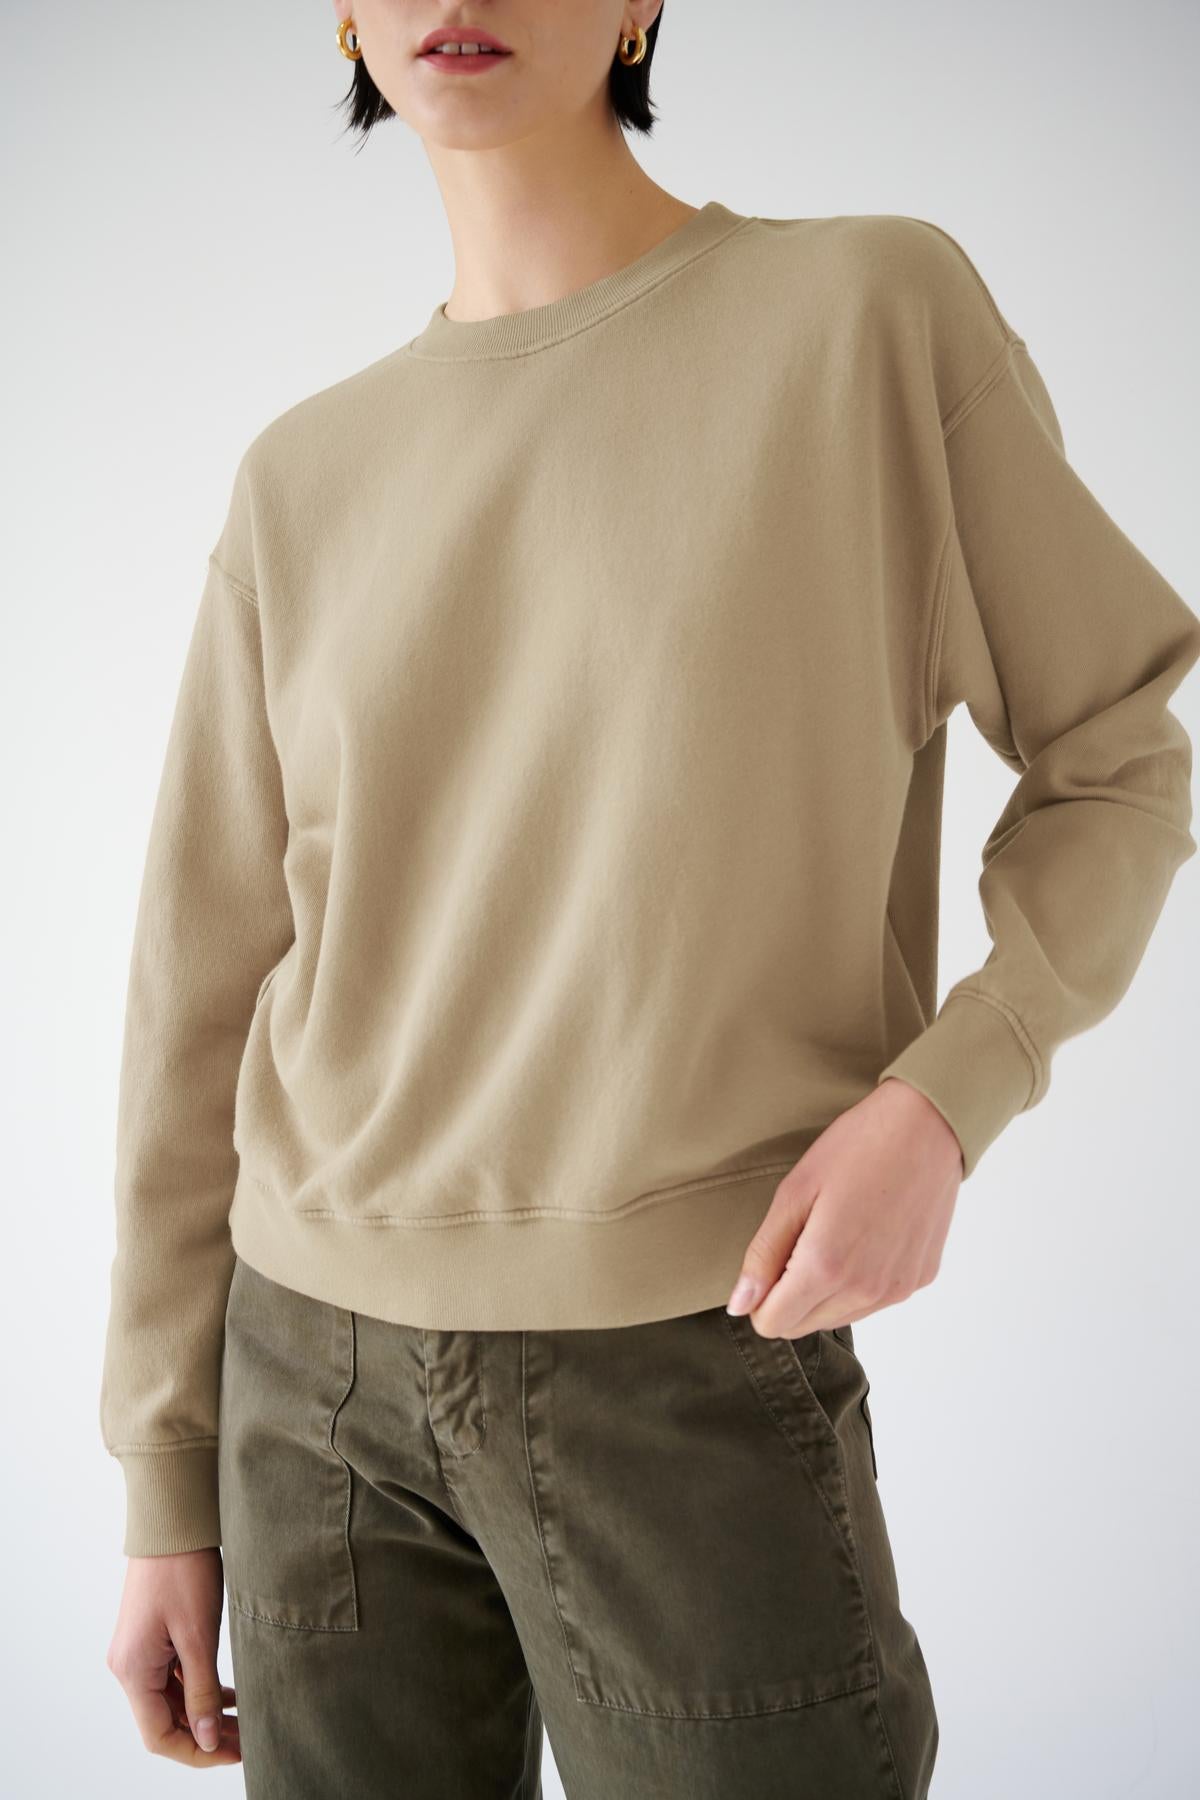 Woman modeling a beige Ynez Sweatshirt from Velvet by Jenny Graham and olive green pants, embodying sustainable fashion.-36463630778561